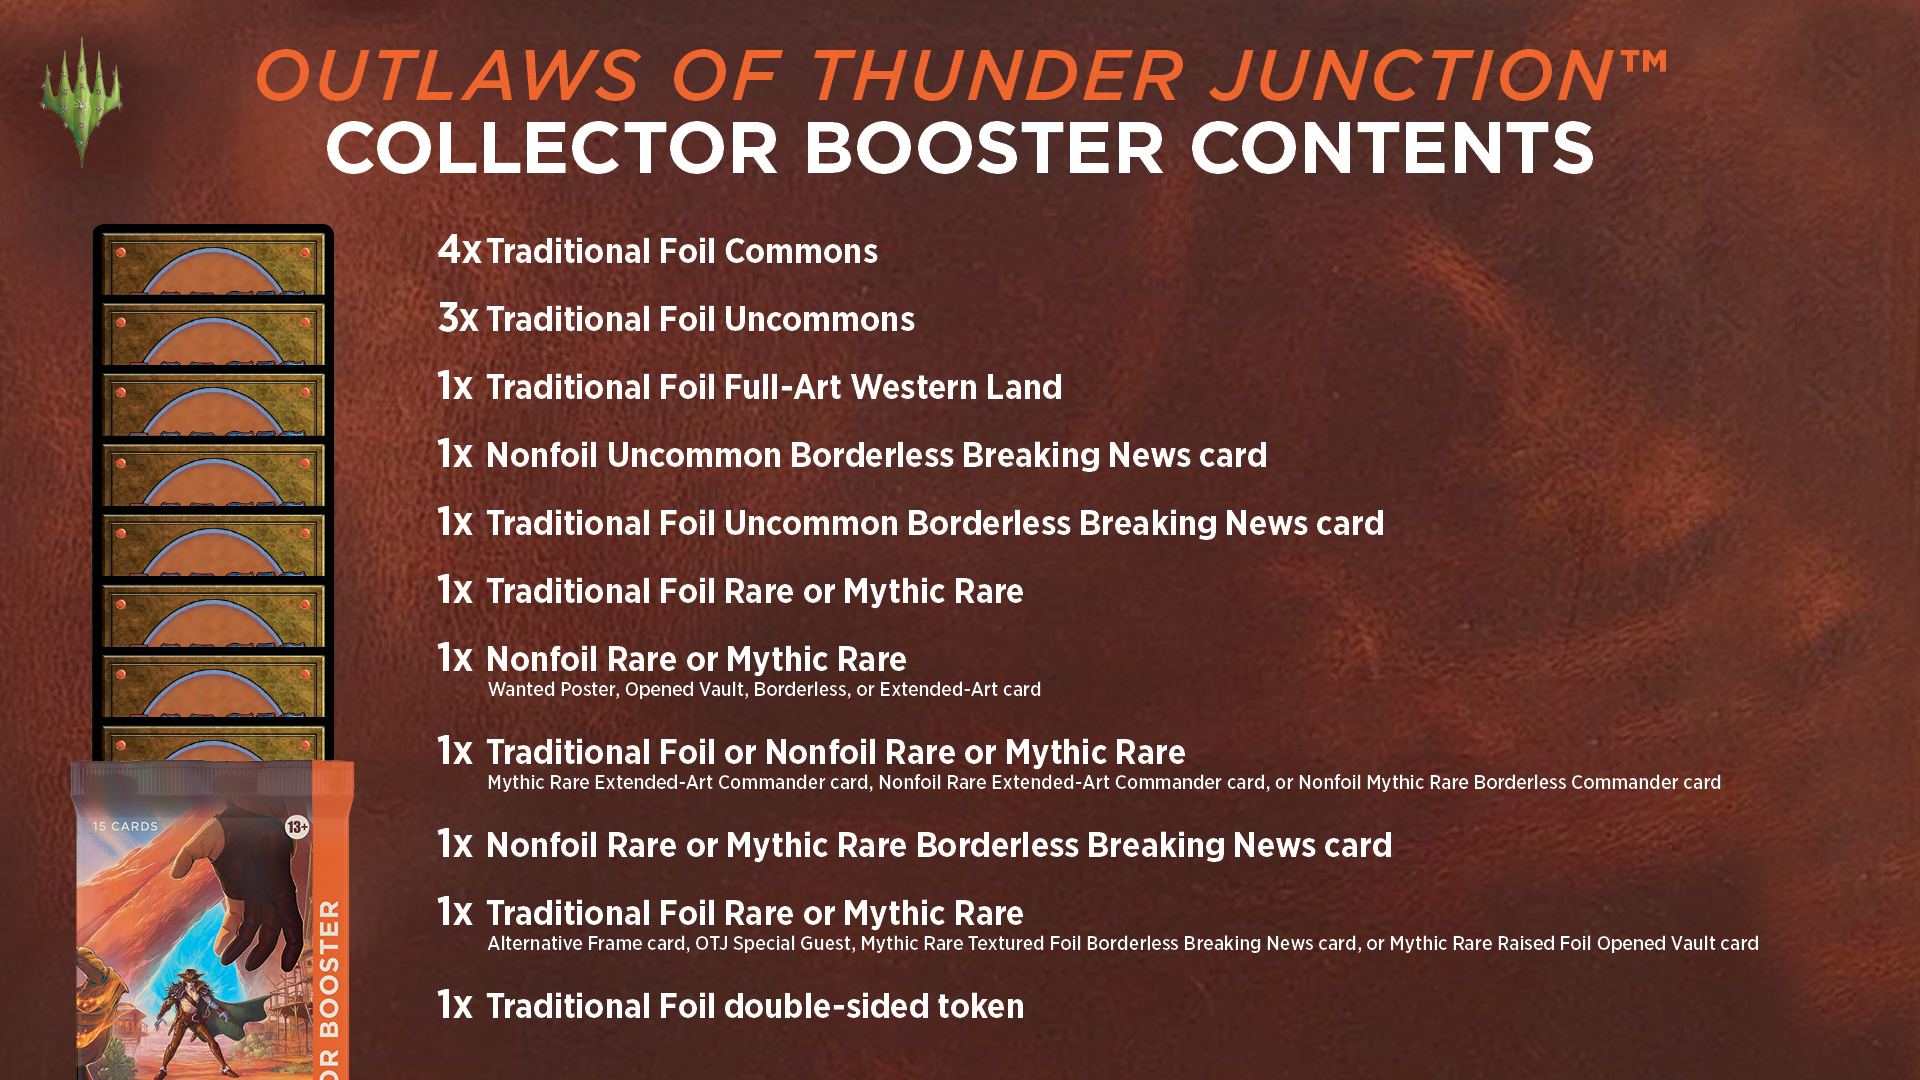 Outlaws of Thunder Junction Collector Booster Breakdown